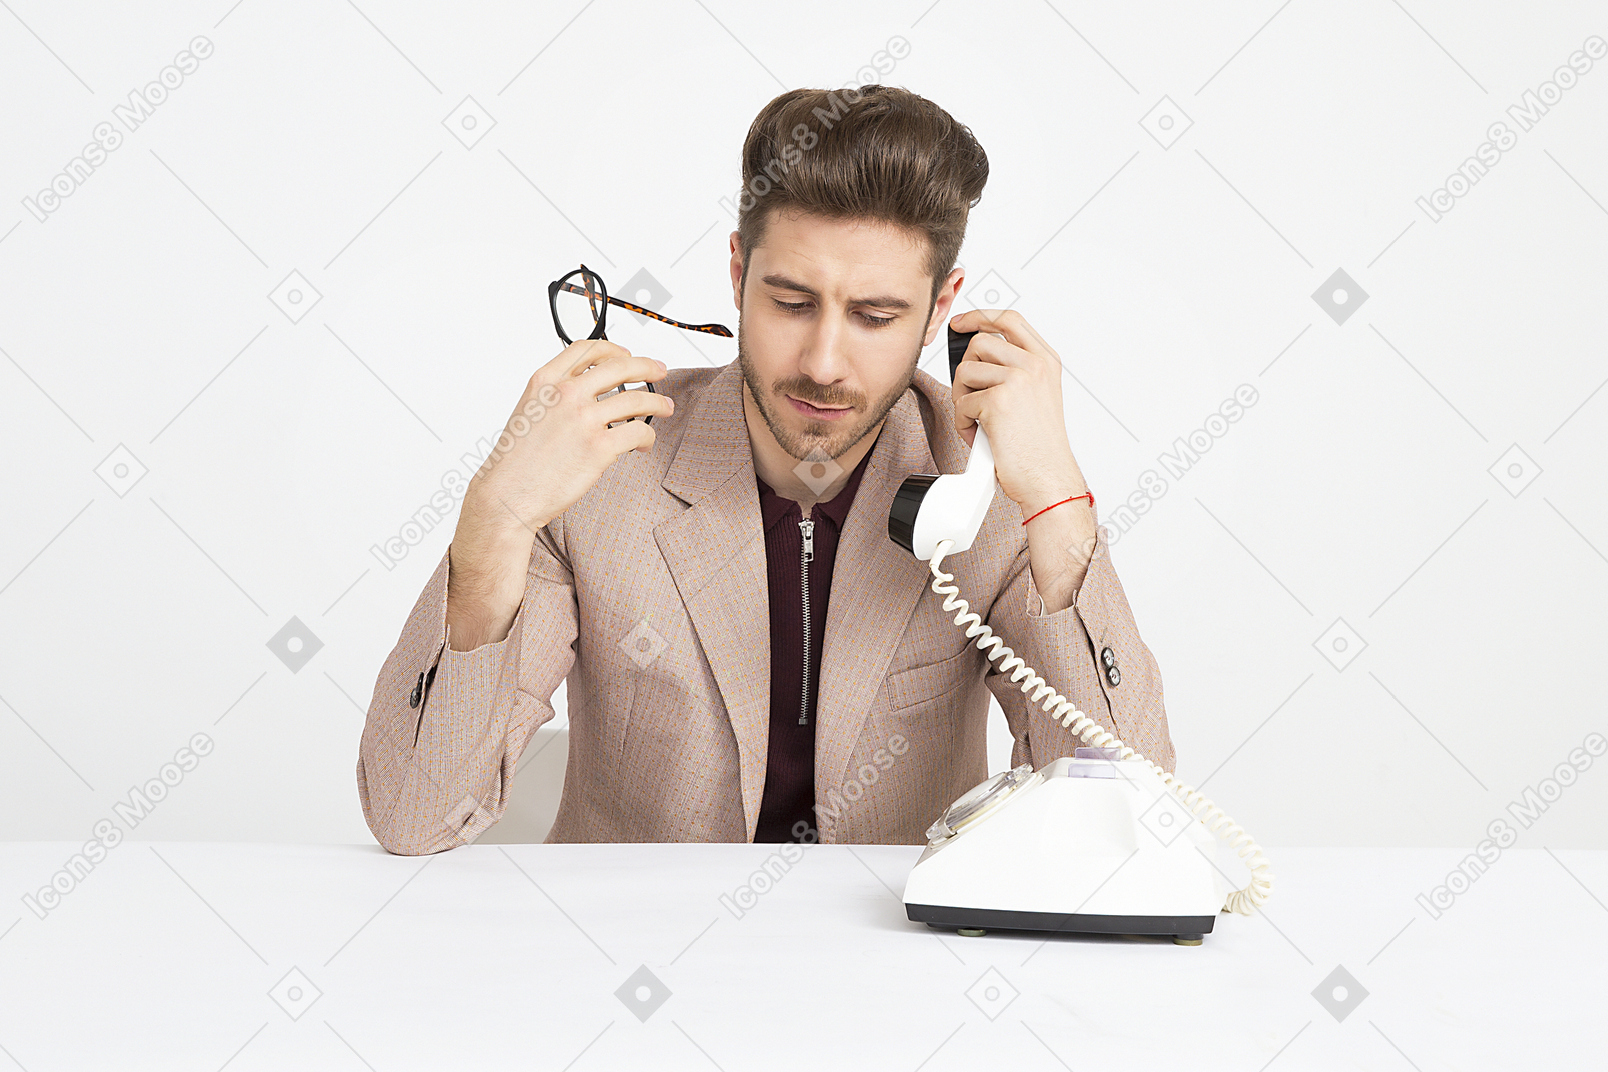 Handsome young man holding phone receiver close to his ear